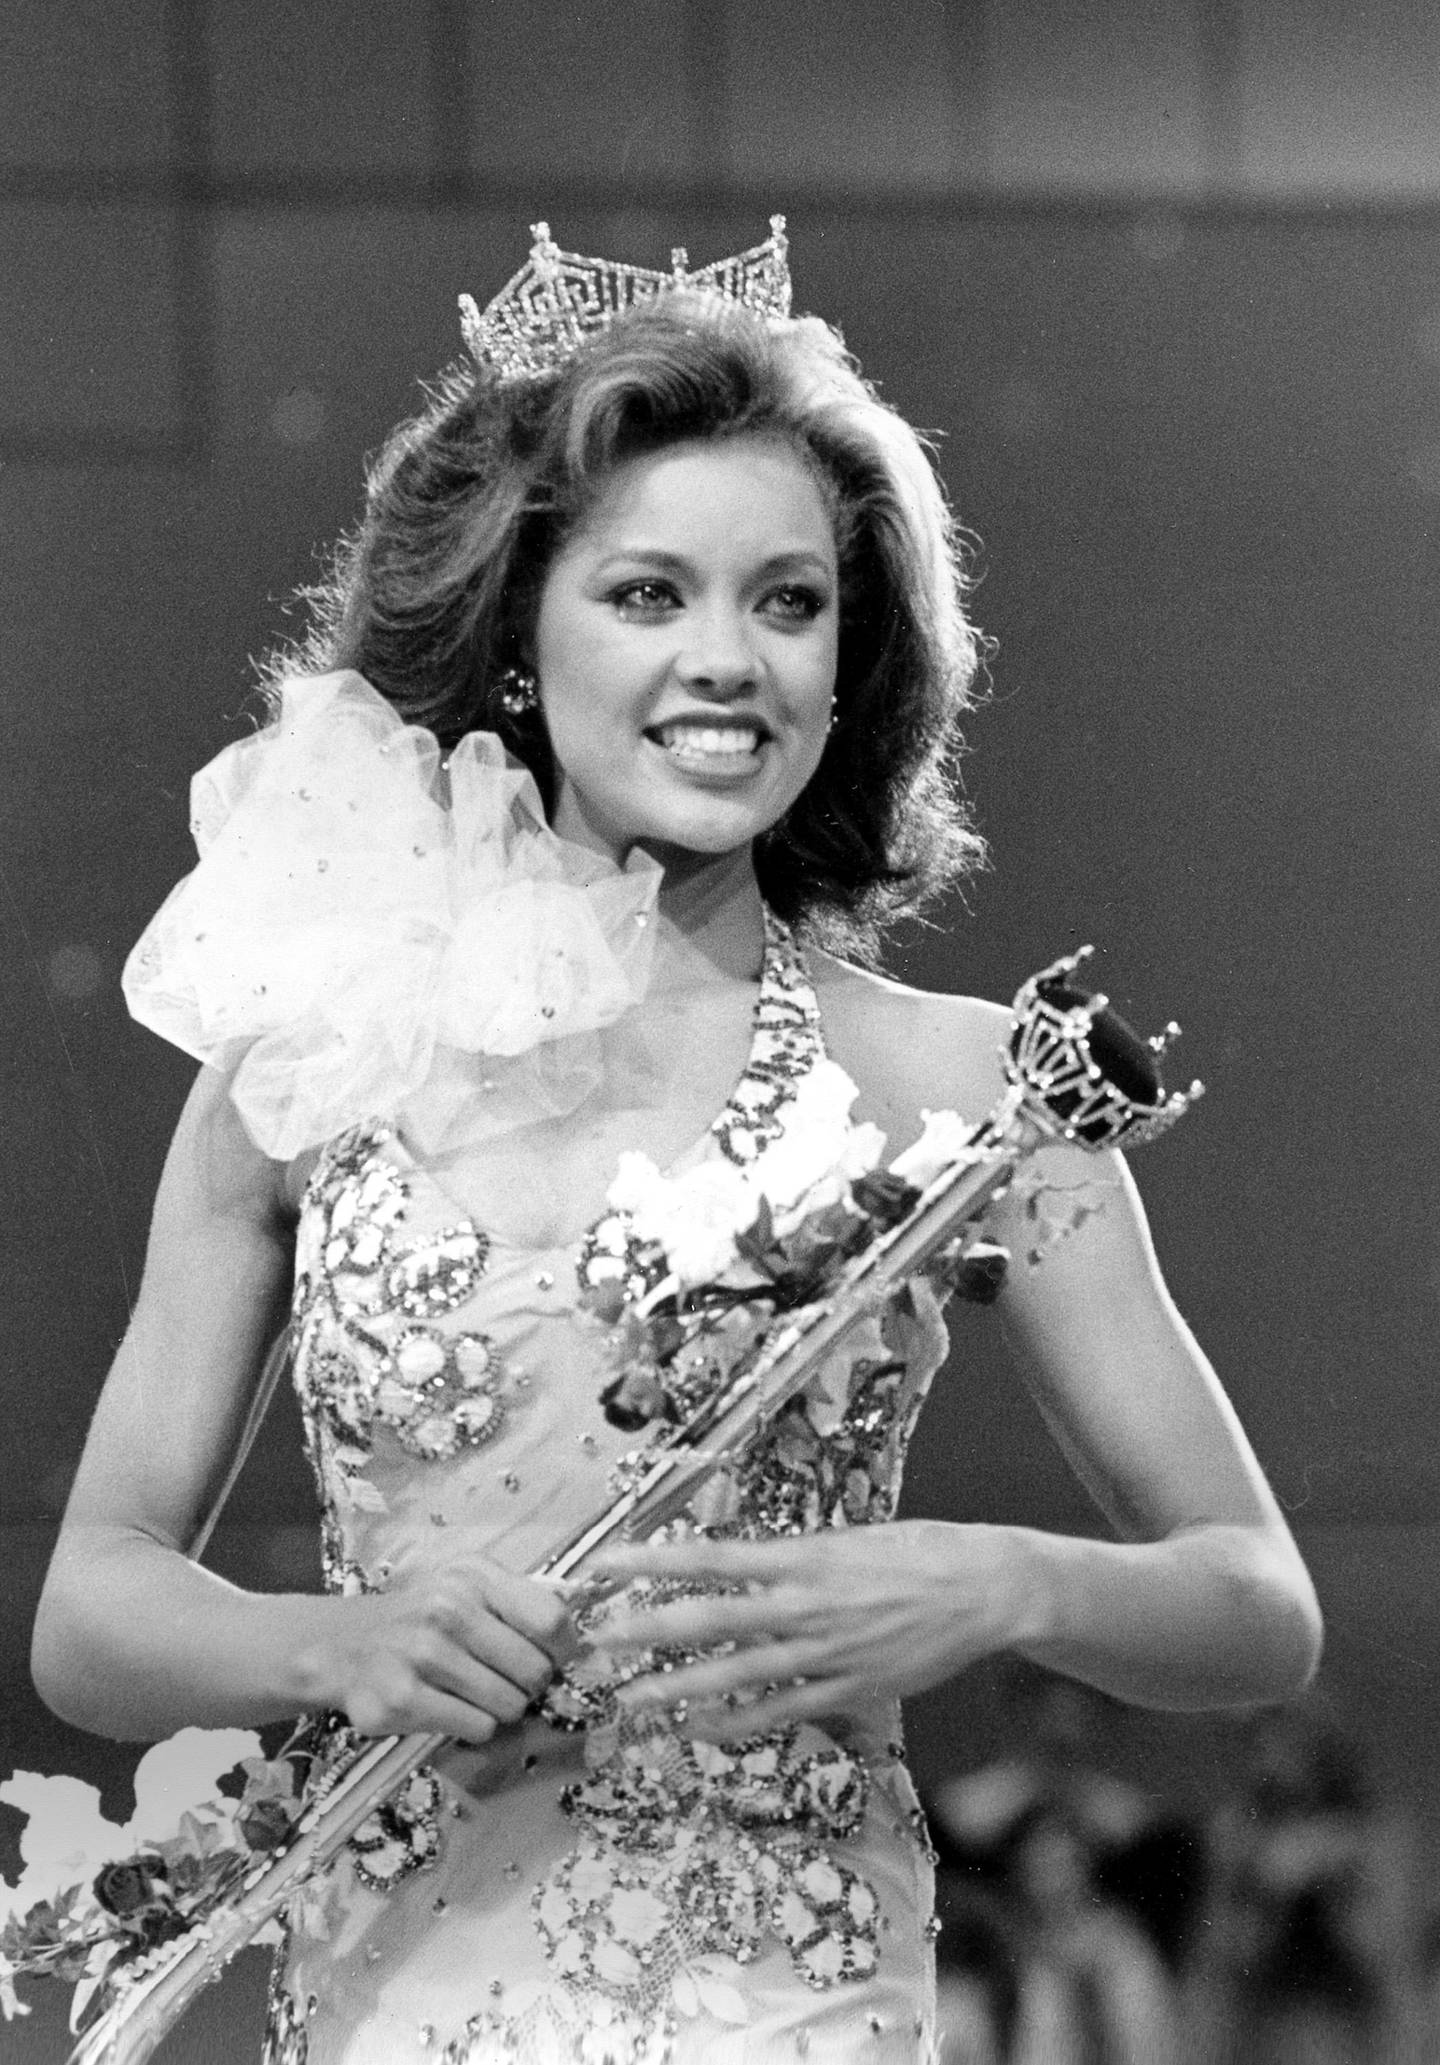 FILE - In this Sept. 17, 1983 file photo, Miss New York Vanessa Williams appears during her coronation walk after she was crowned Miss America 1984 at the Miss America Pageant in Atlantic City, N.J. The Miss America Organization, Dick Clark Productions and the ABC television network announced Tuesday, Sept. 8, 2015, that they are bringing back the actress and singer to serve as head judge for the 2016 competition. Williams won the title in 1984 but resigned after Penthouse magazine published sexually explicit photographs of her taken several years earlier.   (AP Photo/Jack Kanthal, File)